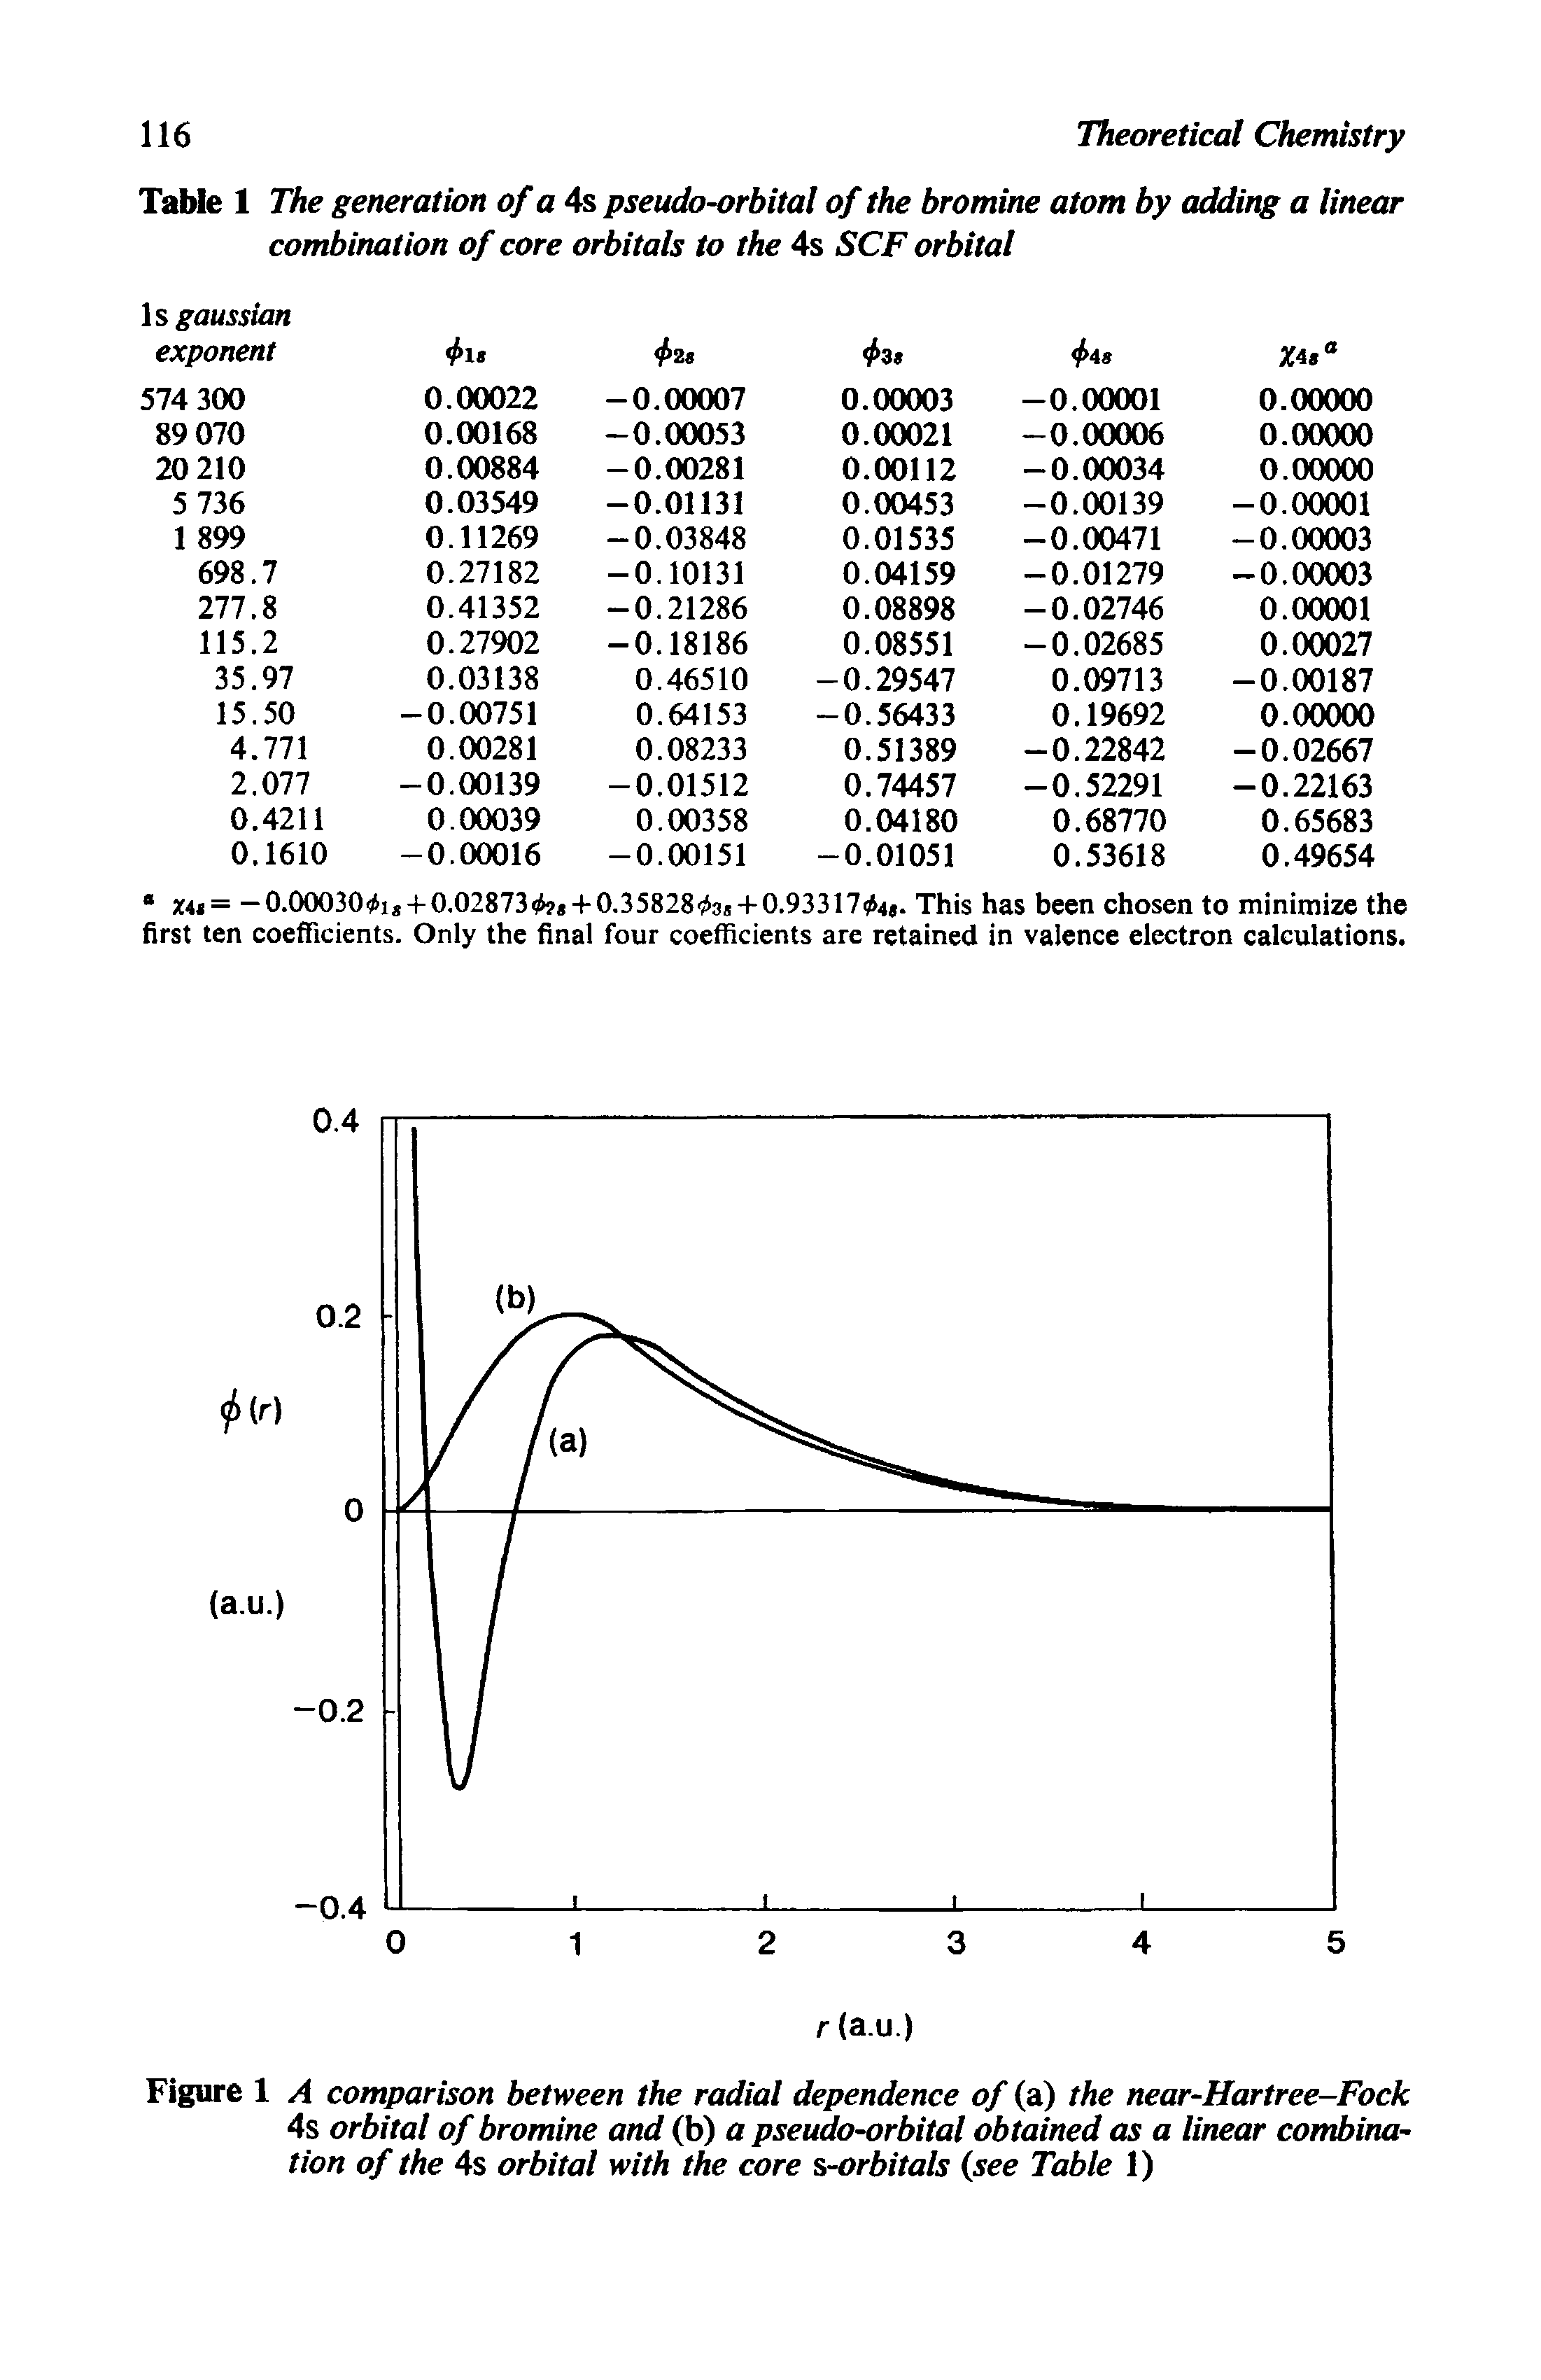 Figure 1 A comparison between the radial dependence of (a) the near-Hartree-Fock 4s orbital of bromine and (b) a pseudo-orbital obtained as a linear combination of the 4s orbital with the core s-orbitals (see Table 1)...